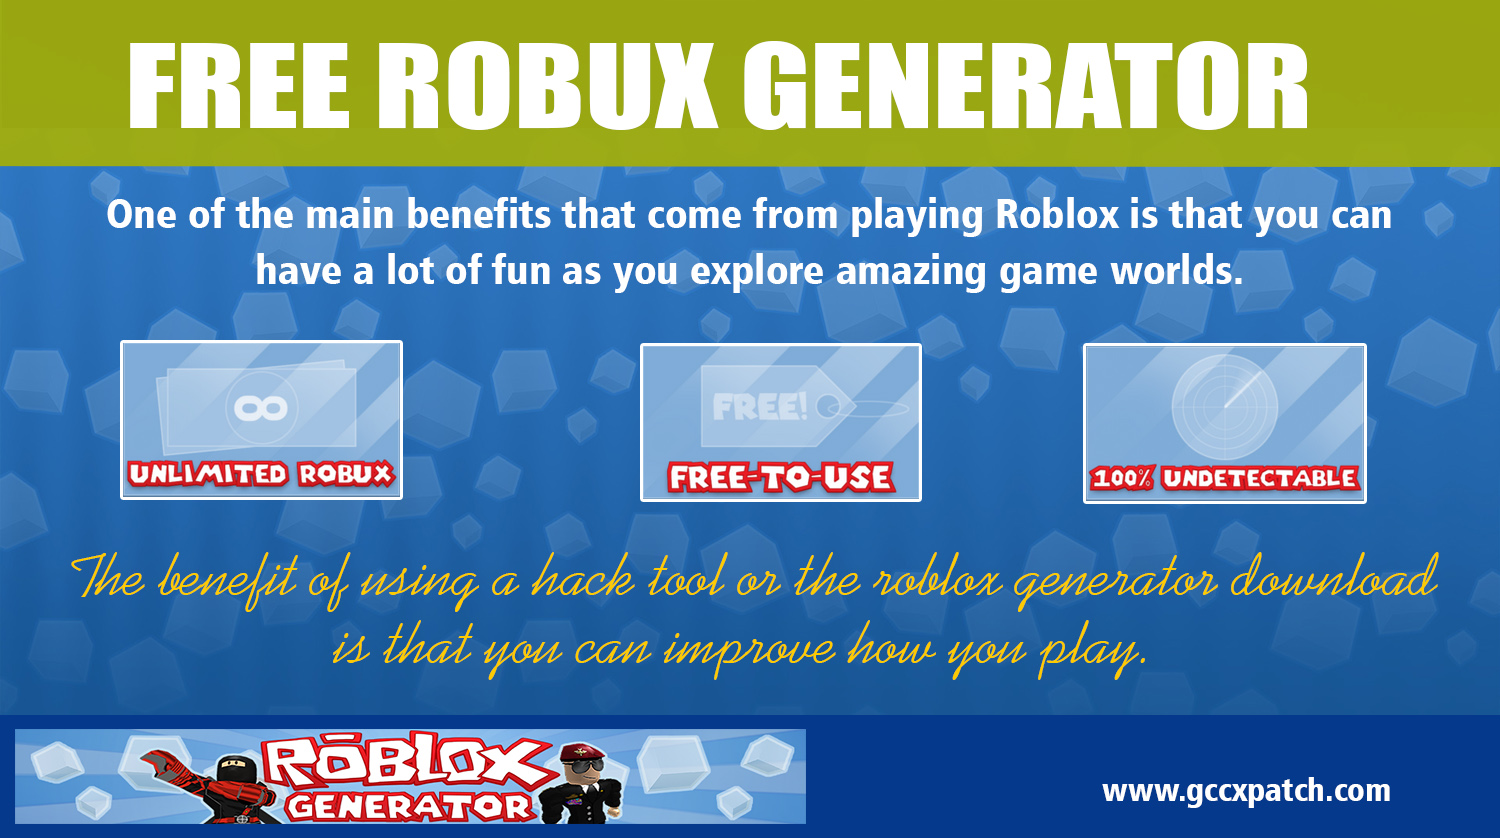 Free Robux Generator Site Pictures - earn free robux plus